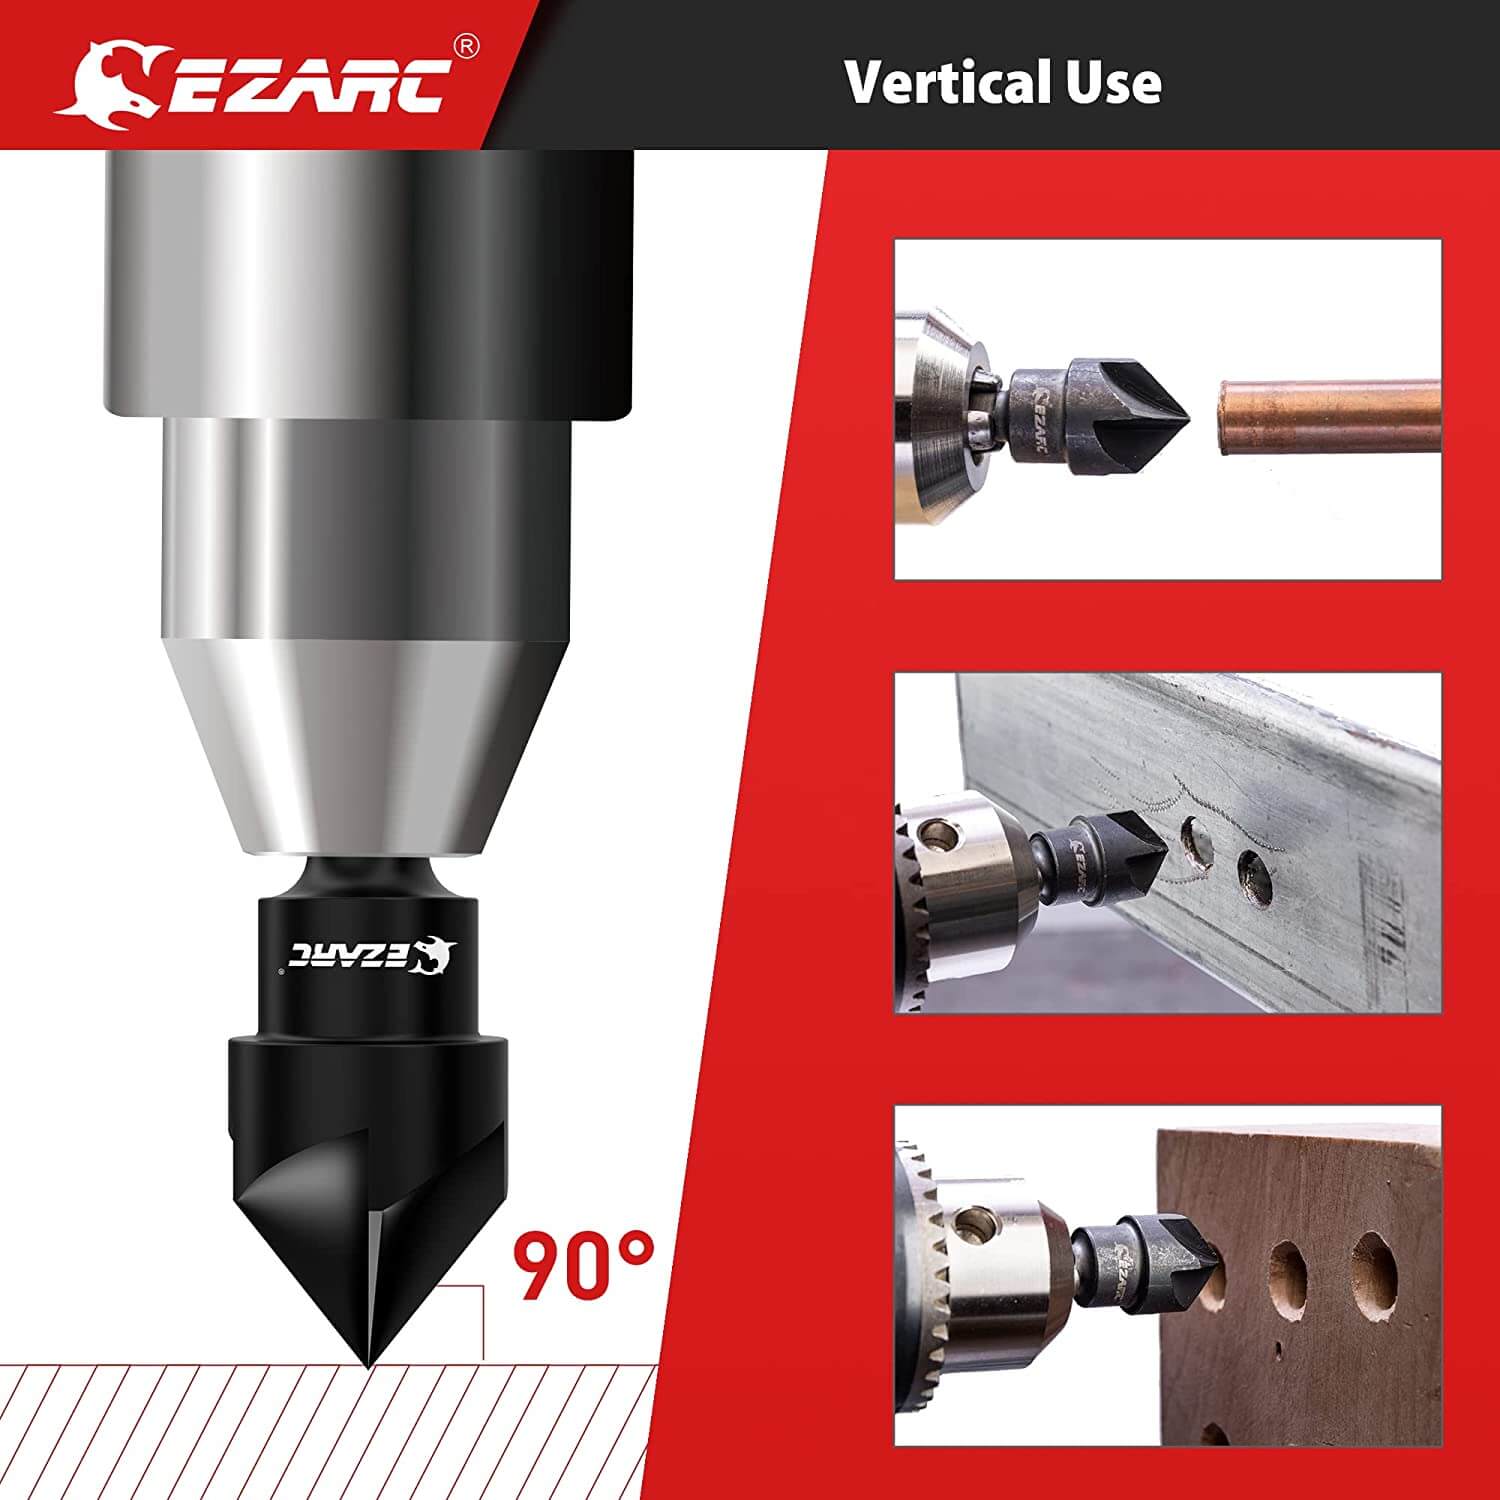 External Rotary Deburring Chamfer & Internal Countersink Chamfer Tool with 1/4